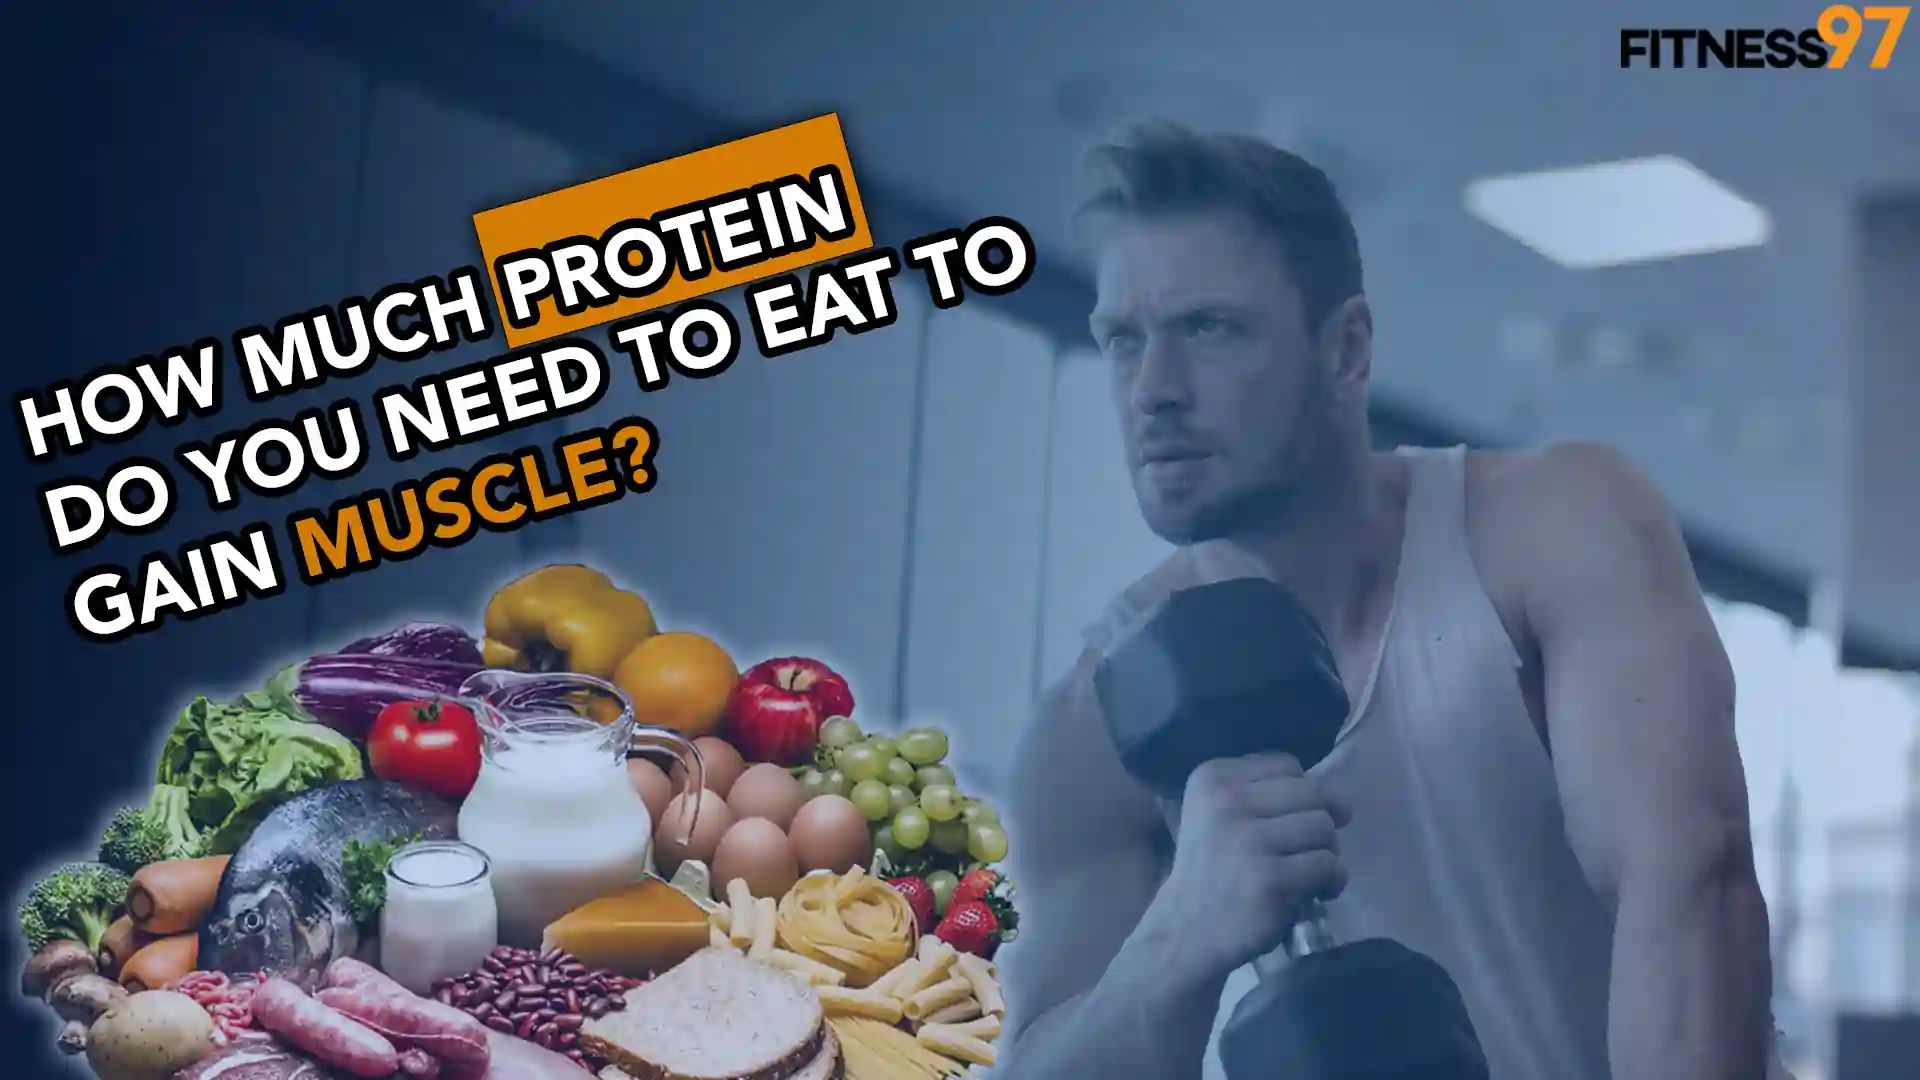 How Much Protein Do You Need To Eat To Gain Size (Muscle)?